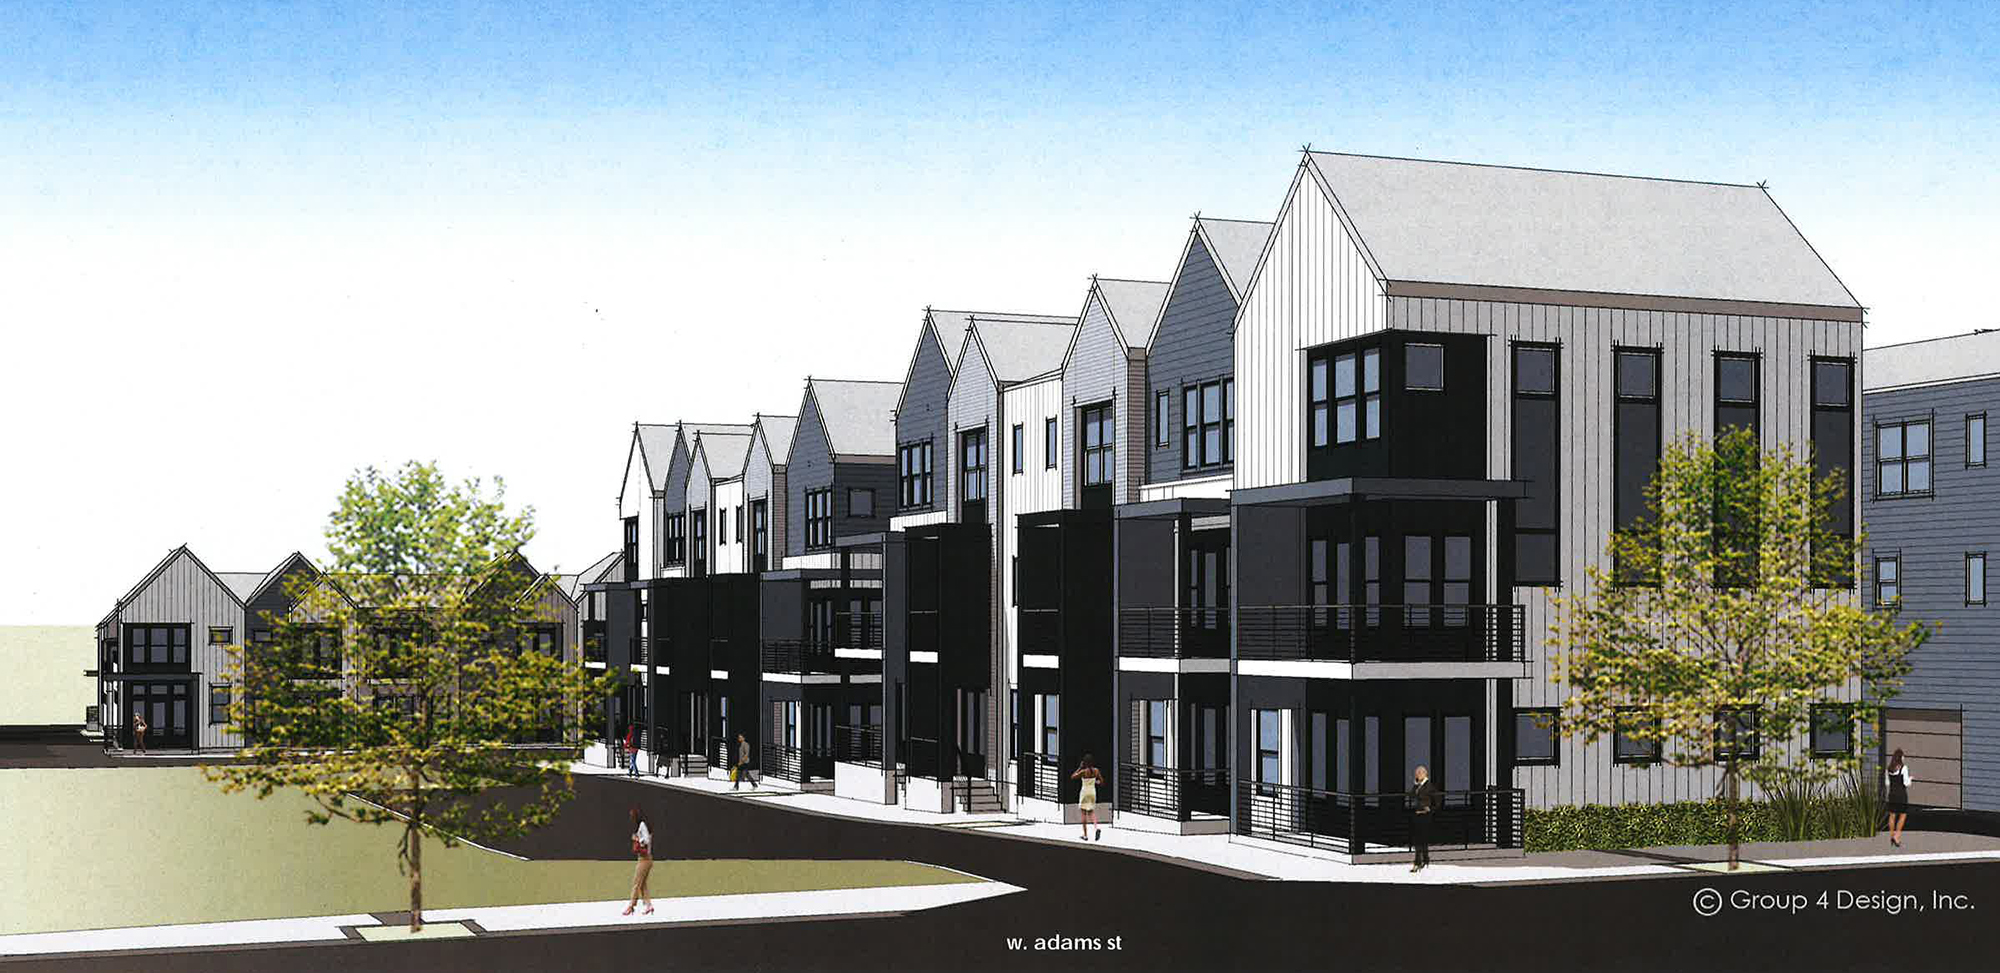 The LaVilla townhomes will be marketed for $250,000.